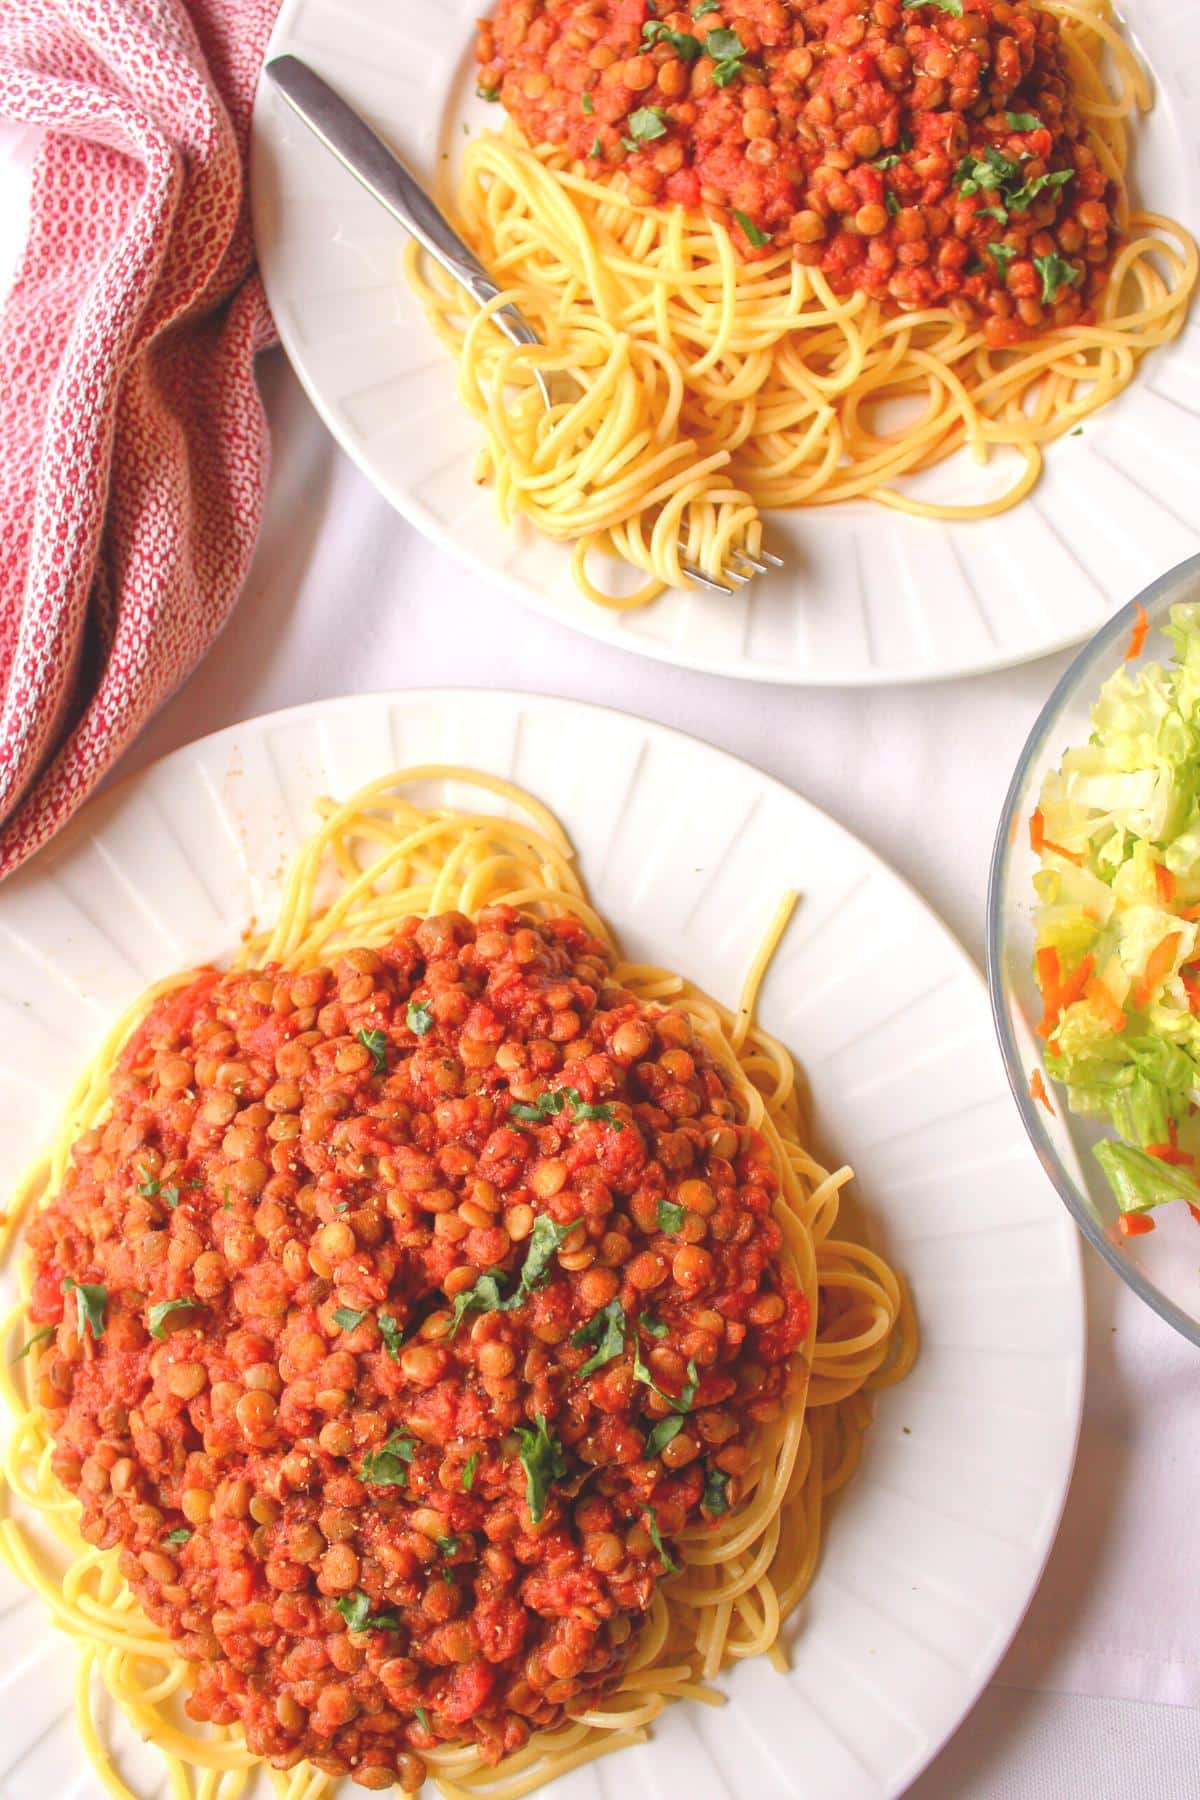 Overhead view of two plates filled with spaghetti and lentil pasta sauce.